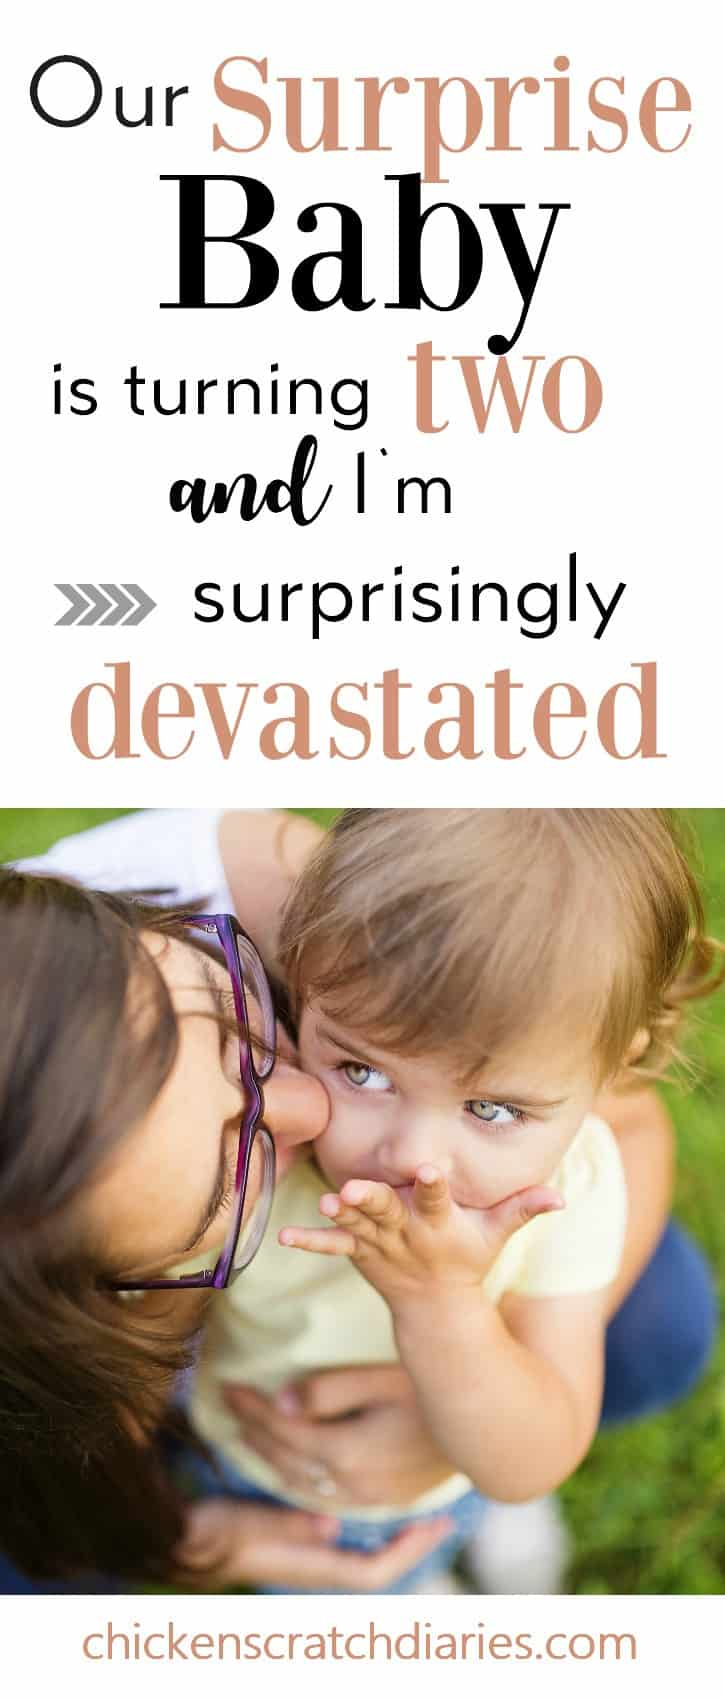 Letter to my daughter - our surprise baby that rocked our world and teaches me more than I'll ever teach her. #Pregnancy #ChristianMom #Parenting #Babies